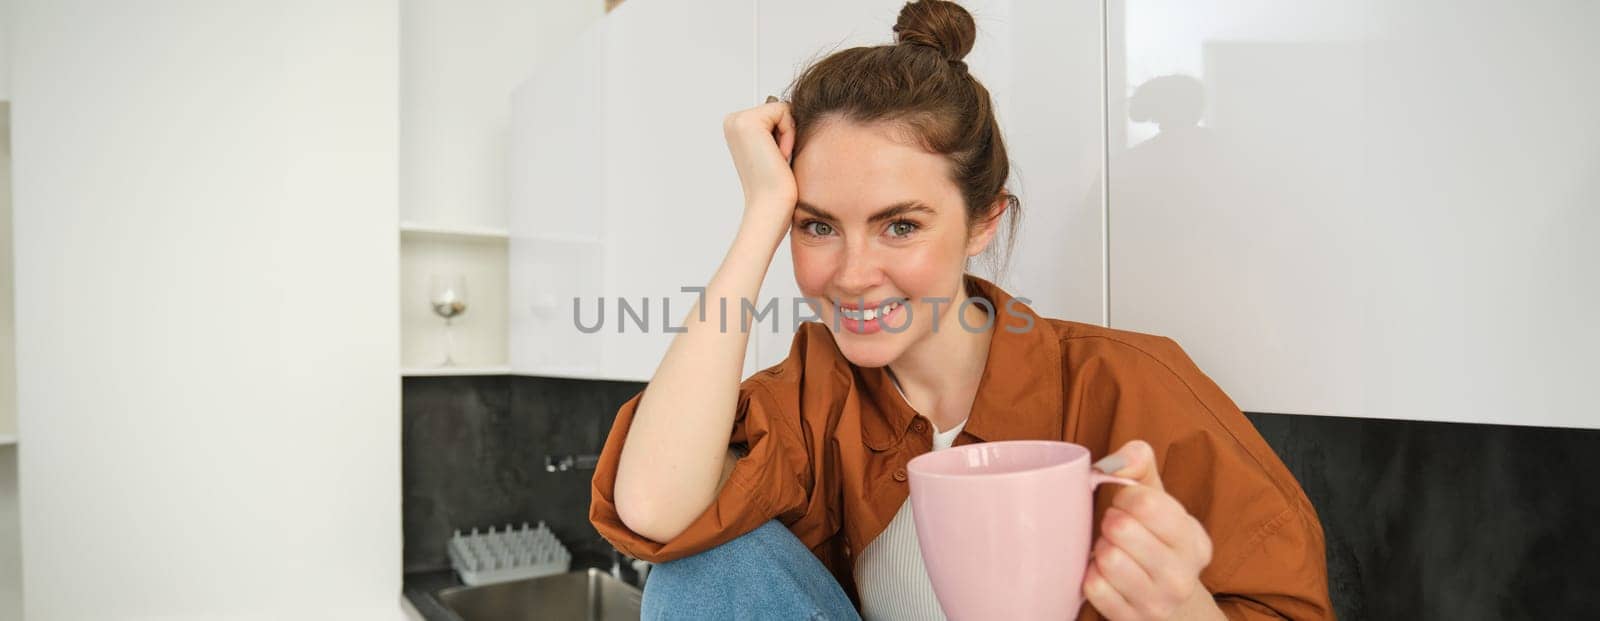 Portrait of young woman relaxing in kitchen with cup of coffee, smiling at camera, sitting on kitchen counter.